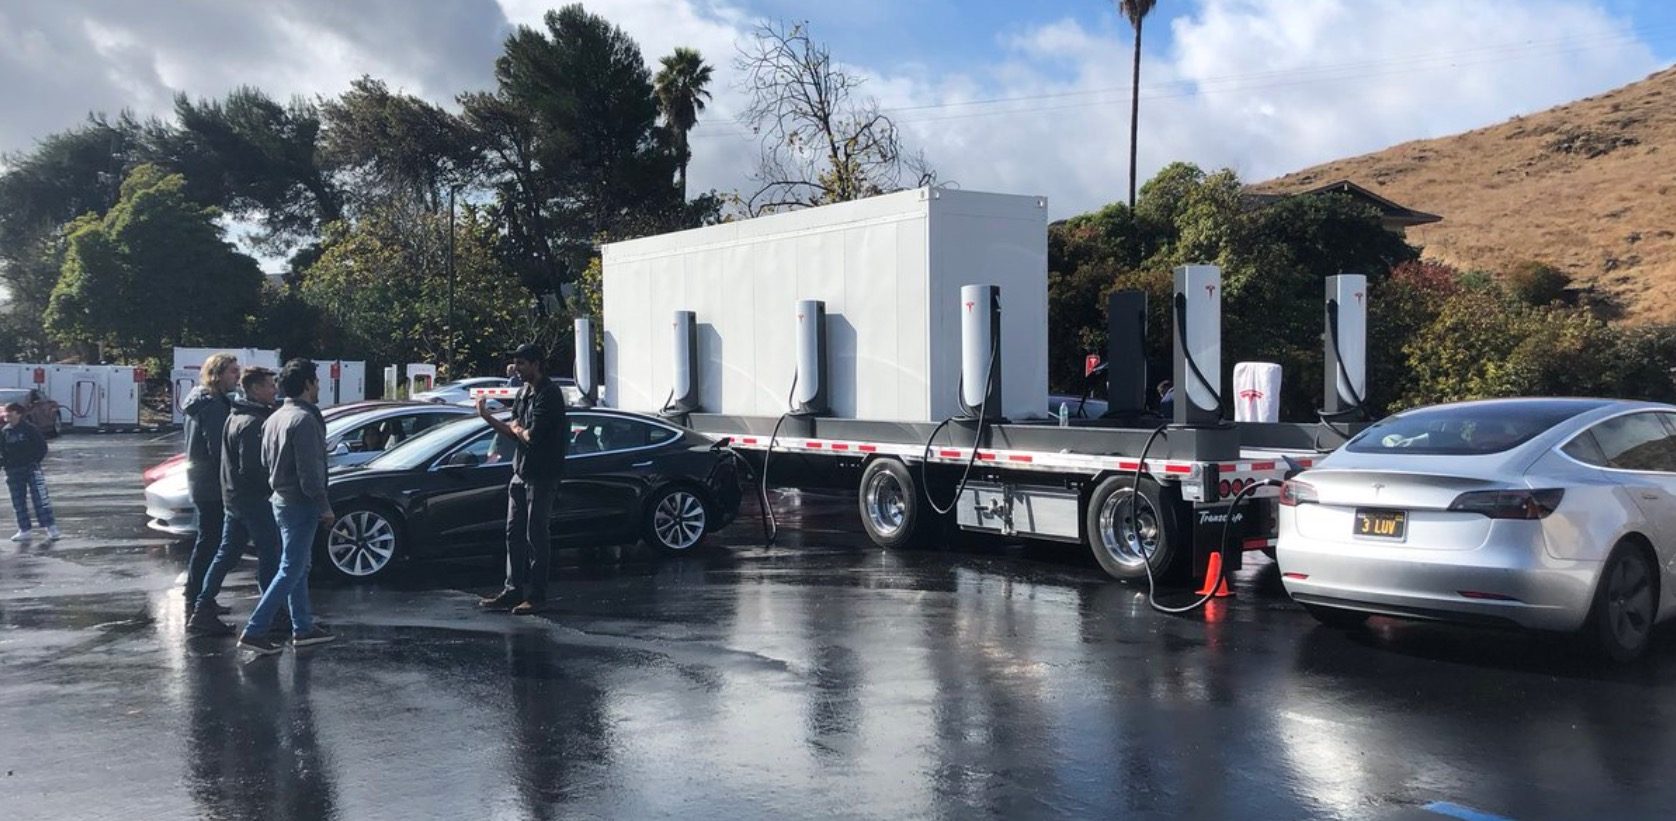 Tesla deploys new mobile Supercharger powered by Megapack instead of